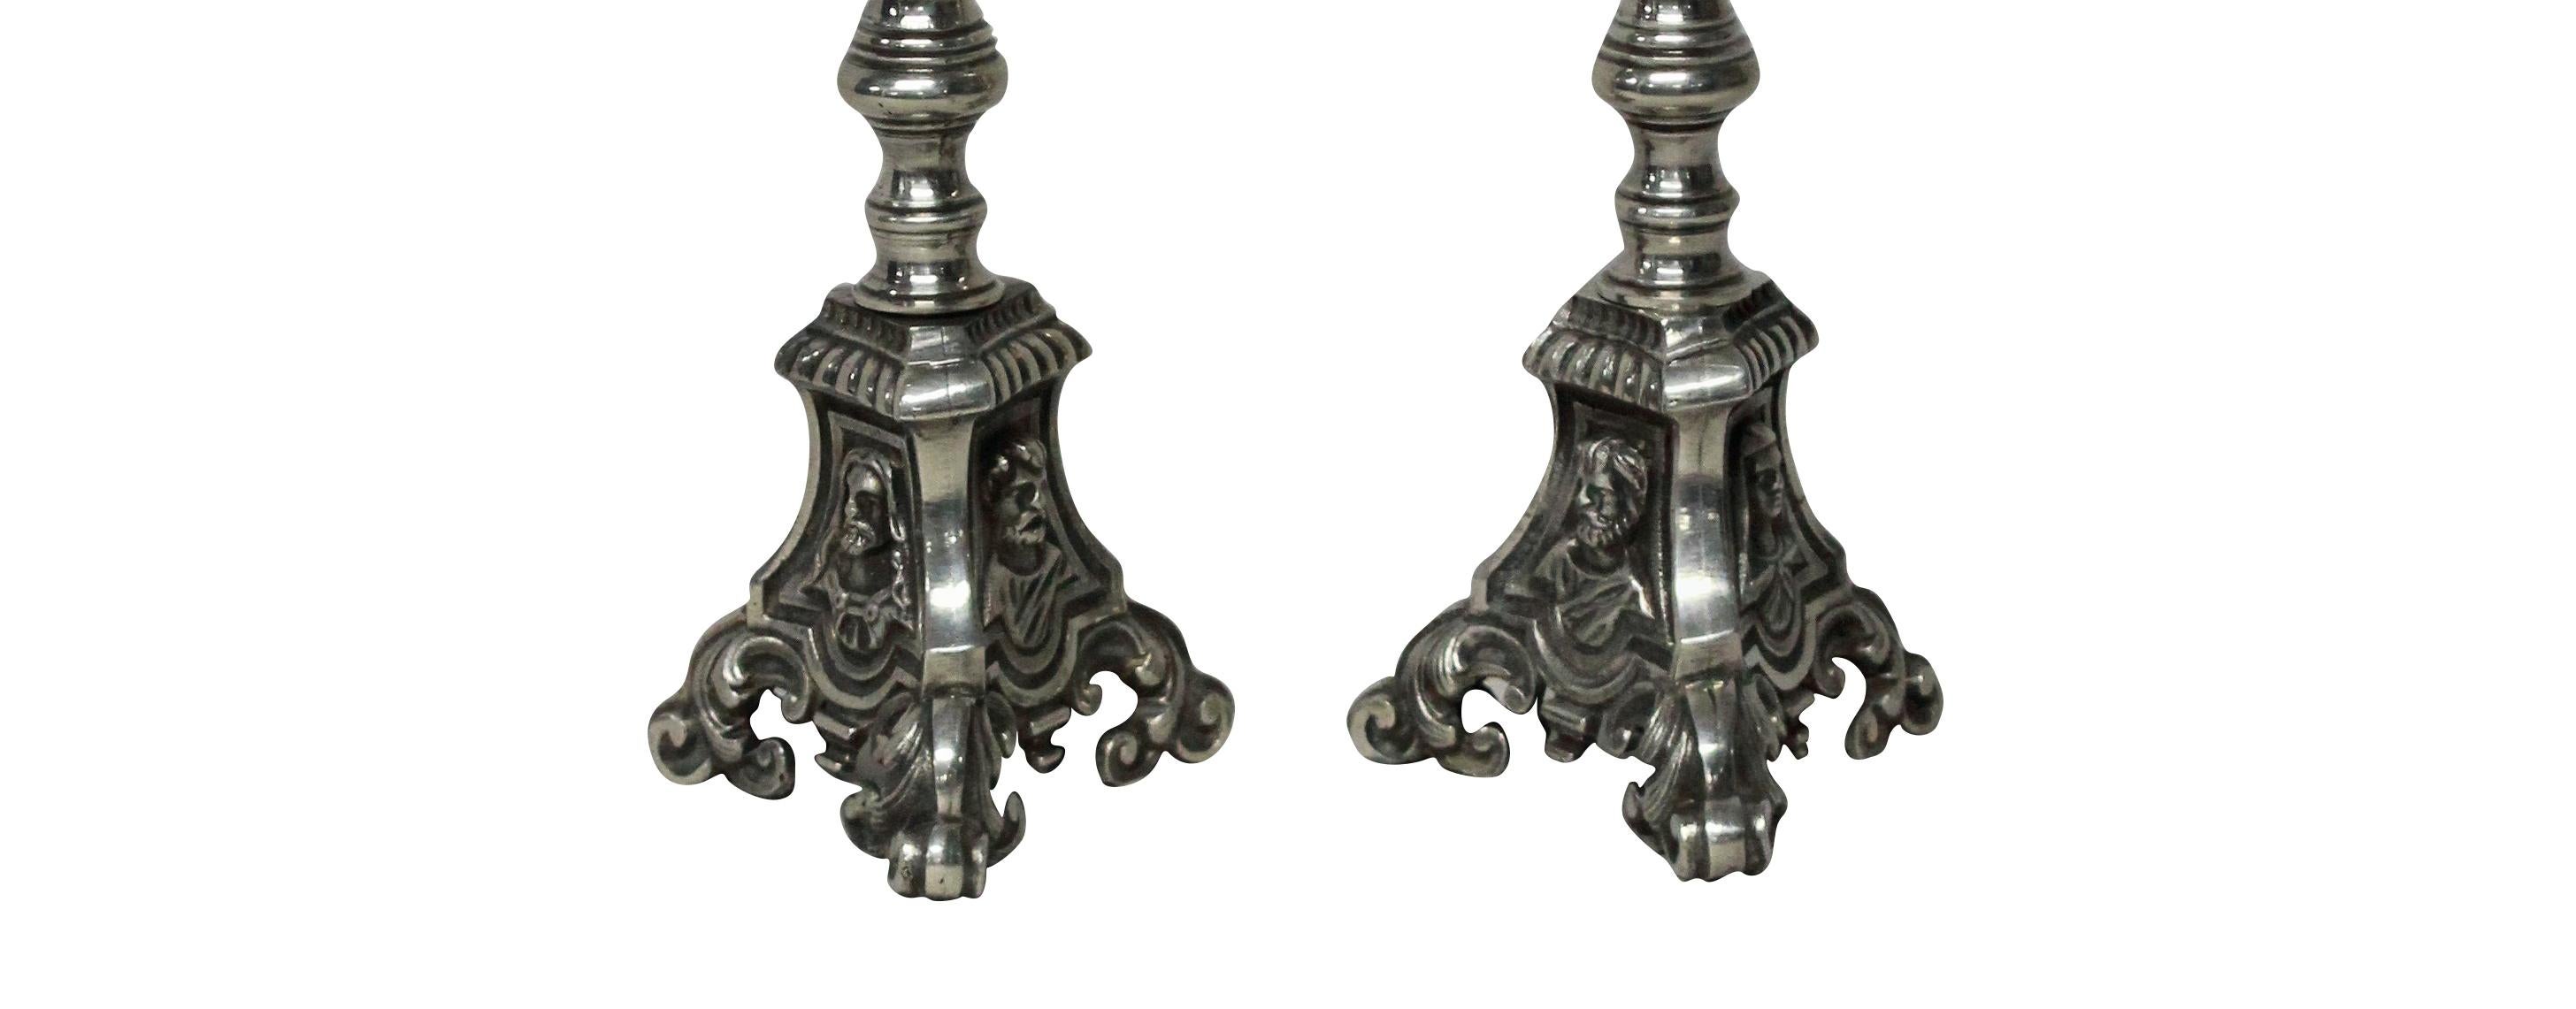 A pair of French silver plated bronze candlesticks, depicting saints at the base. Would make great electrified lamps for a fireplace.

  